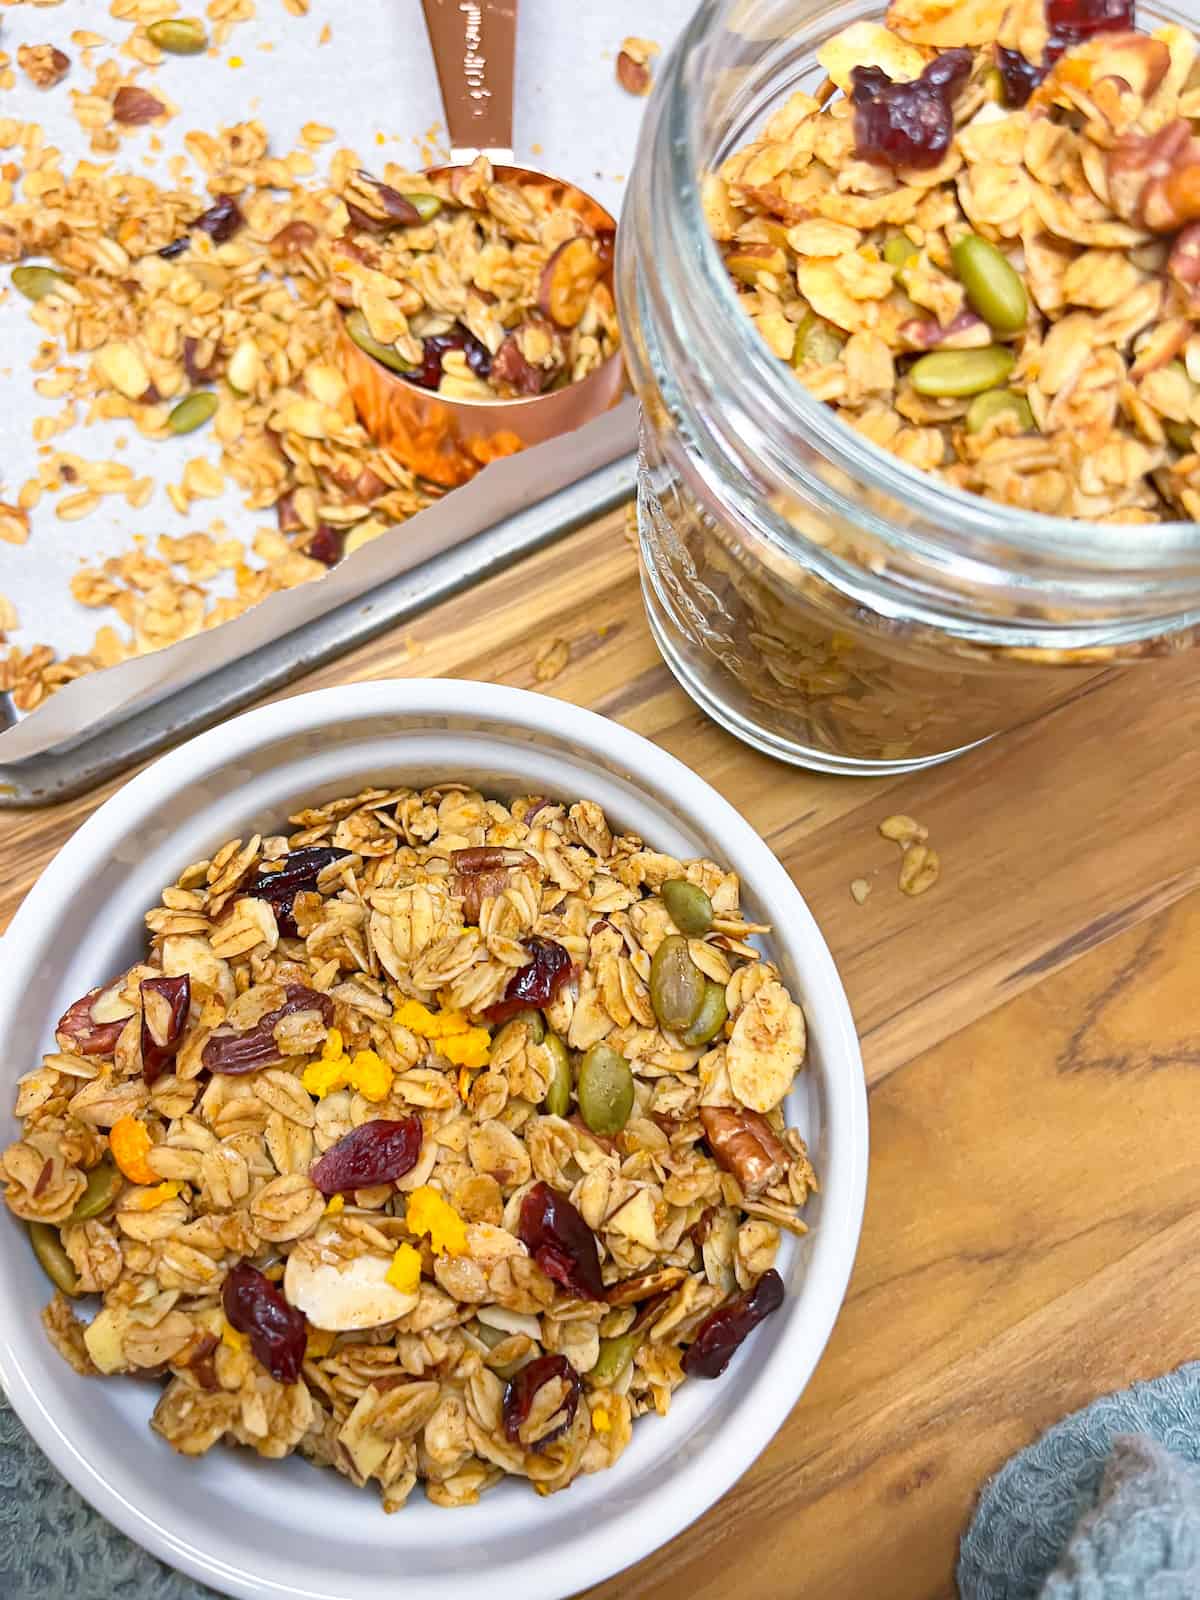 Orange granola in a mason jar and a white bowl and on a baking sheet in the background